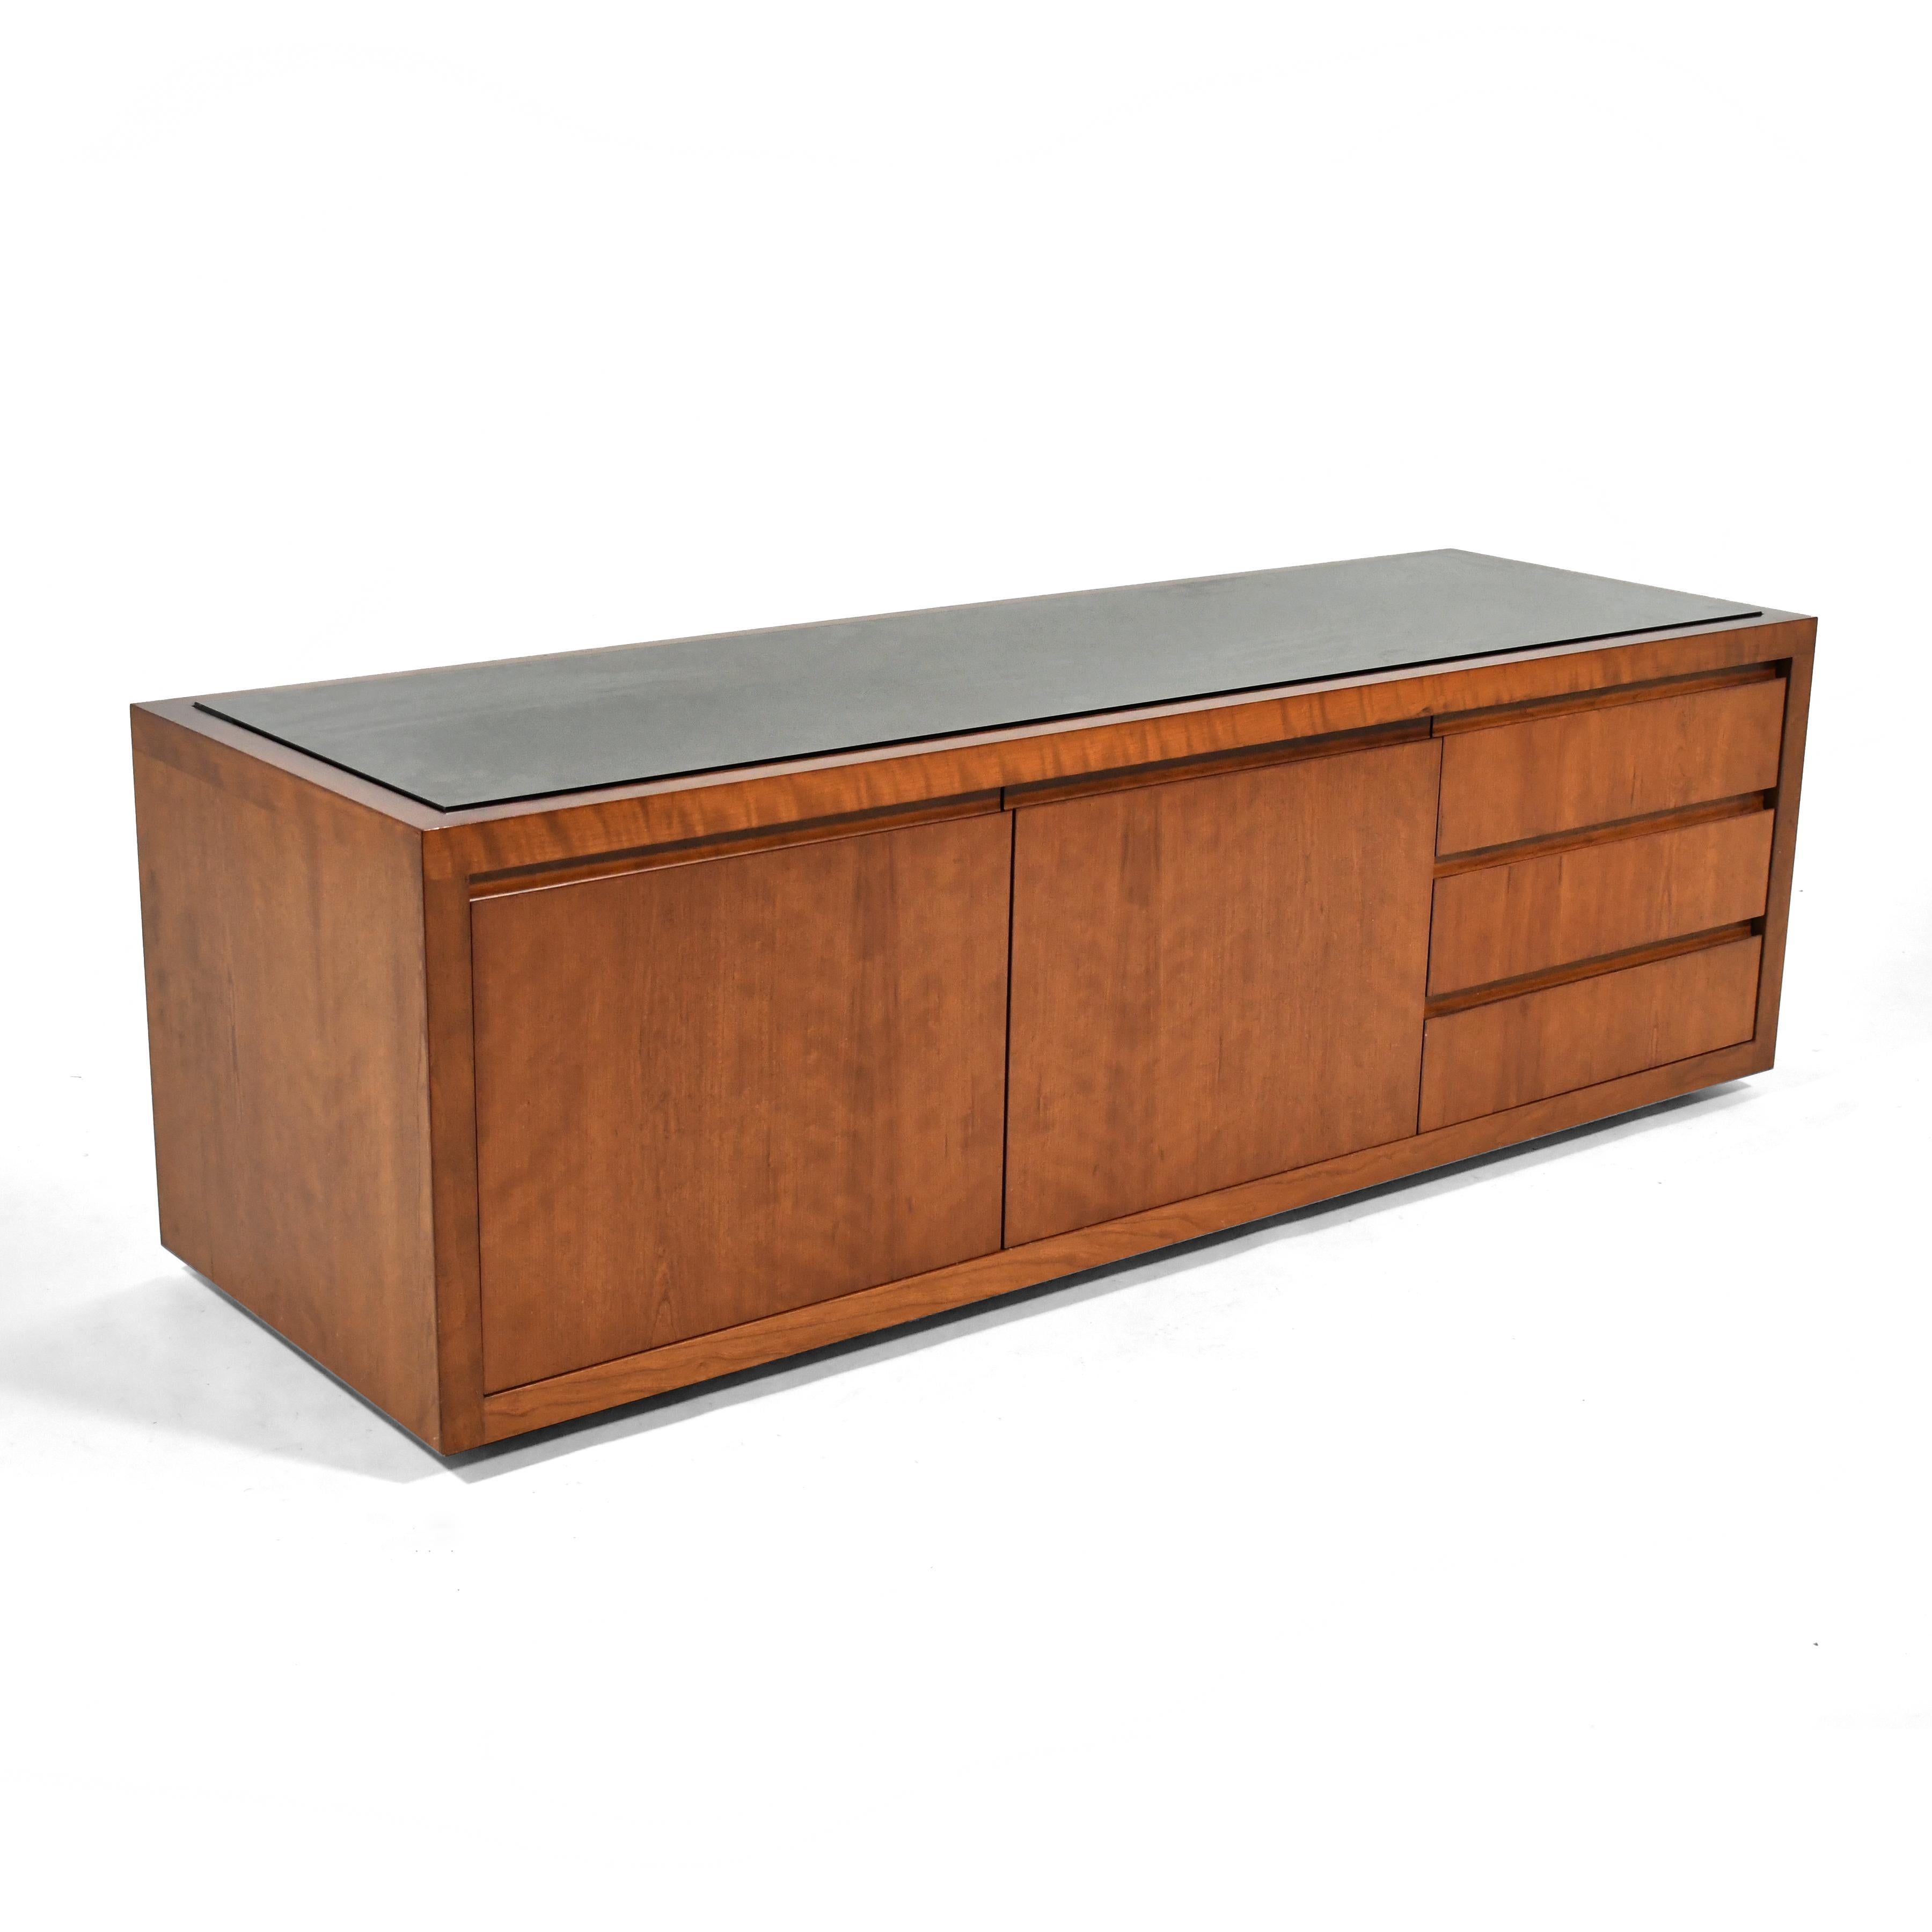 This handsome low cabinet by Conde House has three drawers, two doors that conceal a compartment with an adjustable shelf, and an inset top of smoked glass. It is perfect for use behind a sofa, along a wall with a large window, or as a media